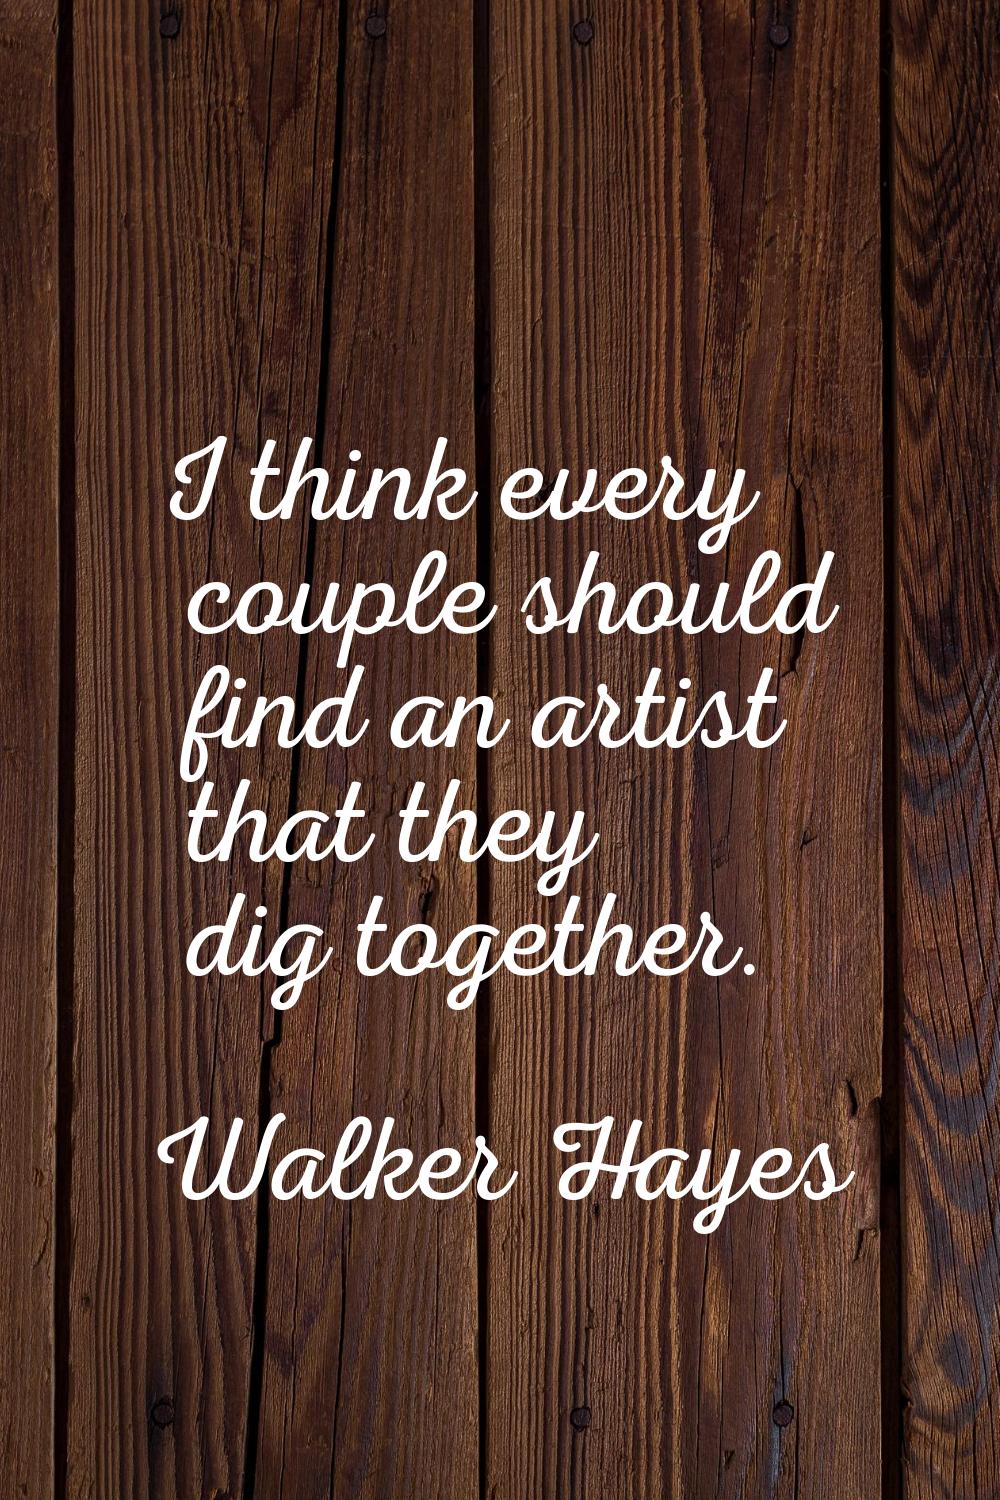 I think every couple should find an artist that they dig together.